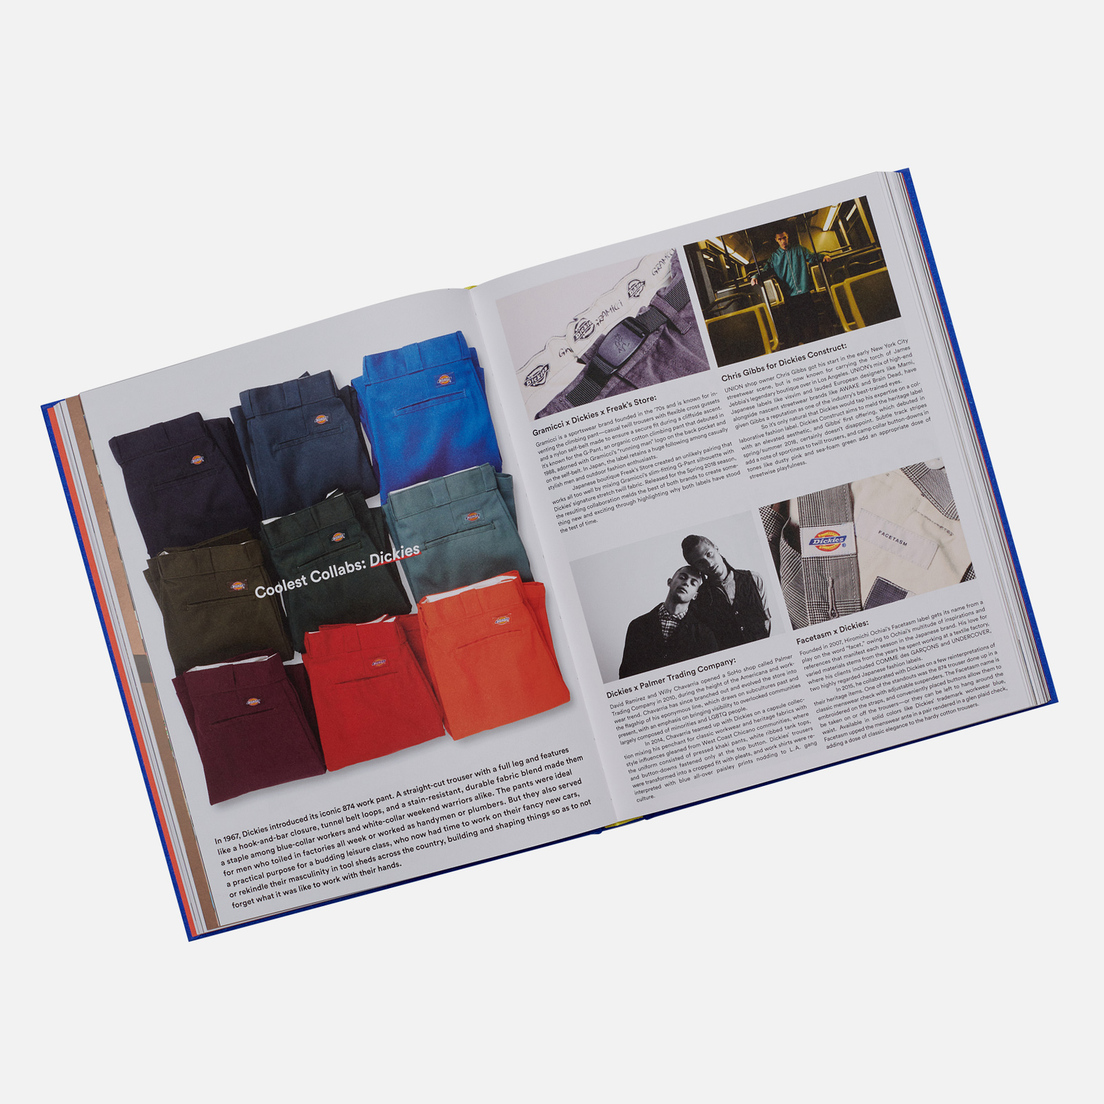 Gestalten Книга The Incomplete: Highsnobiety Guide to Street Fashion and Culture